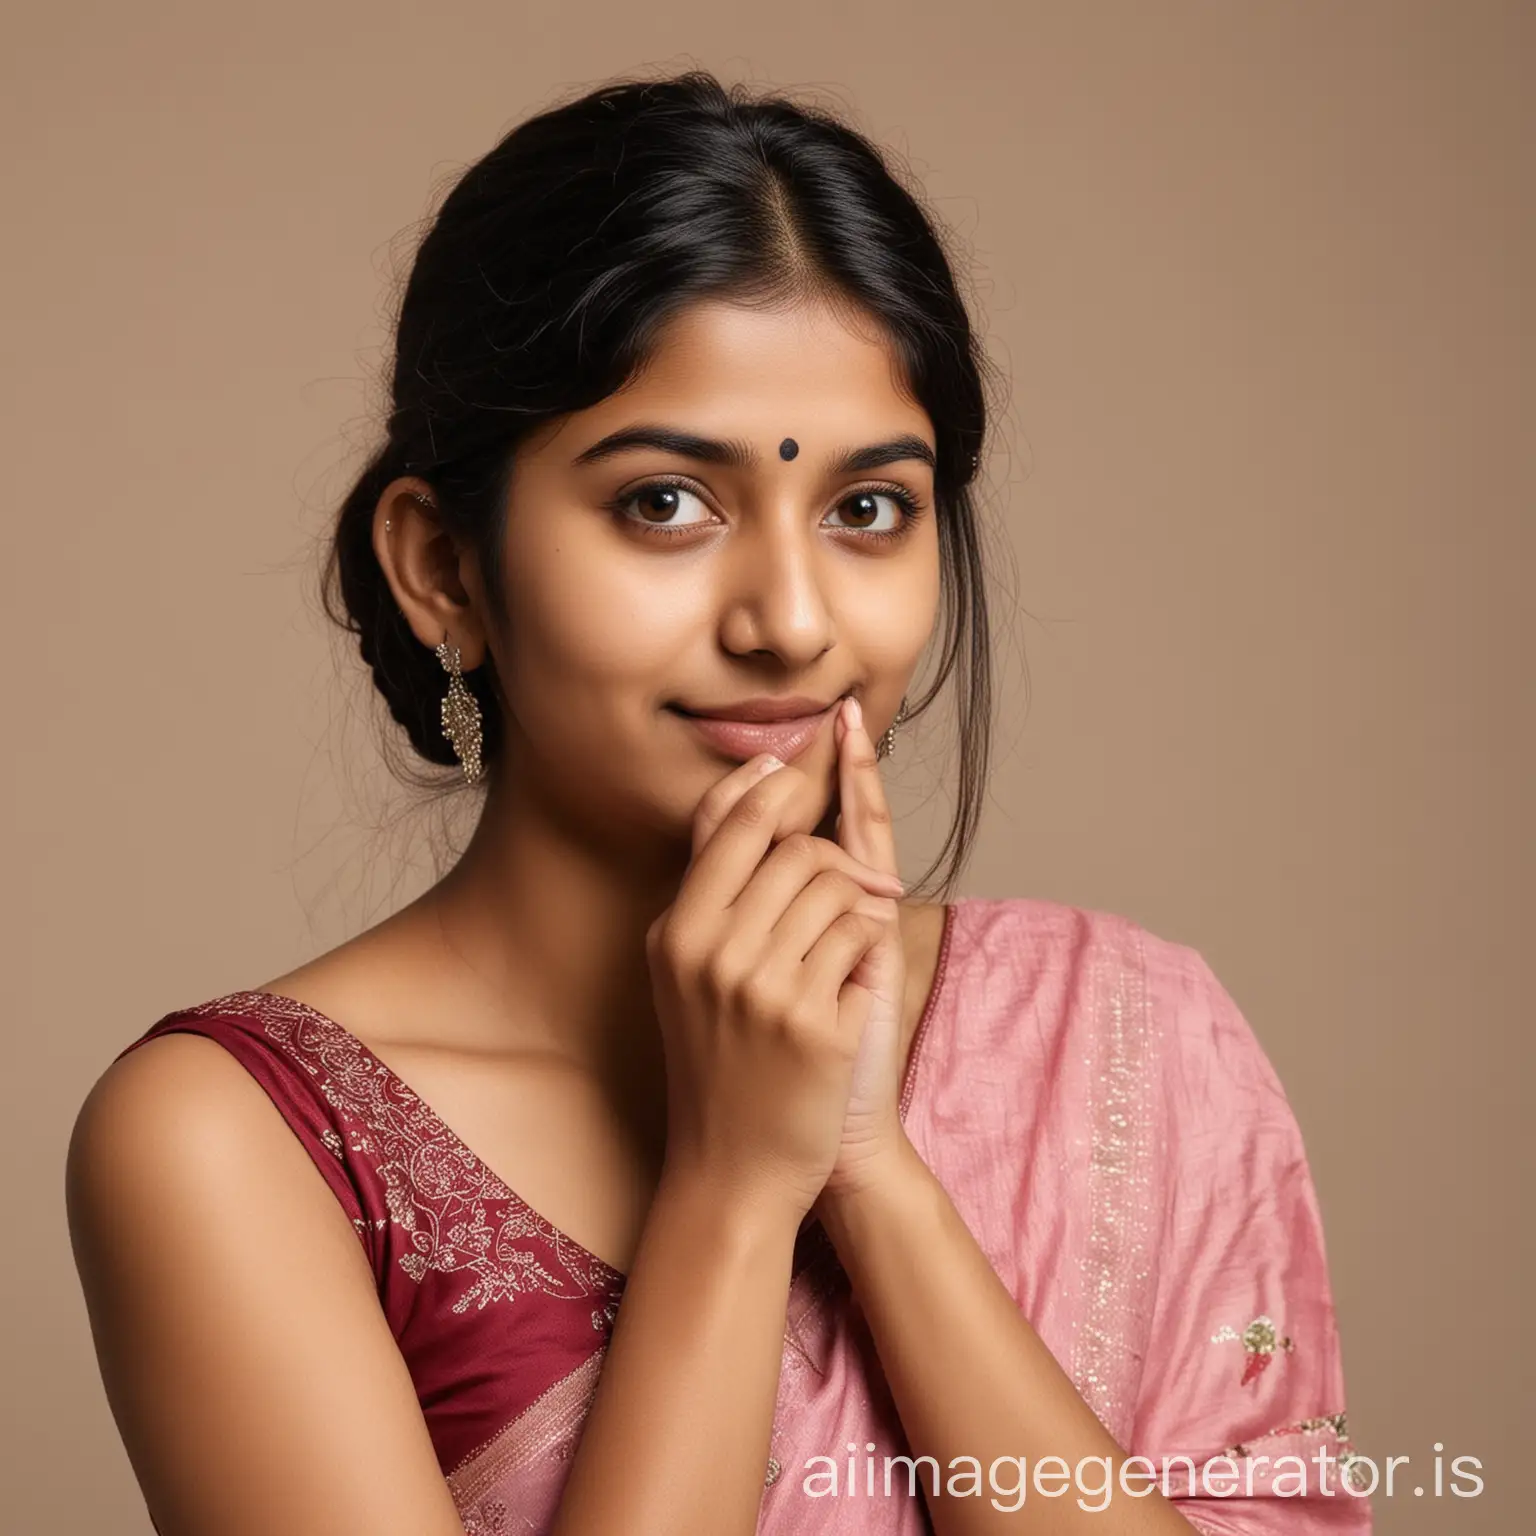 Contemplative-Indian-Woman-Aged-25-Resting-Finger-on-Cheek